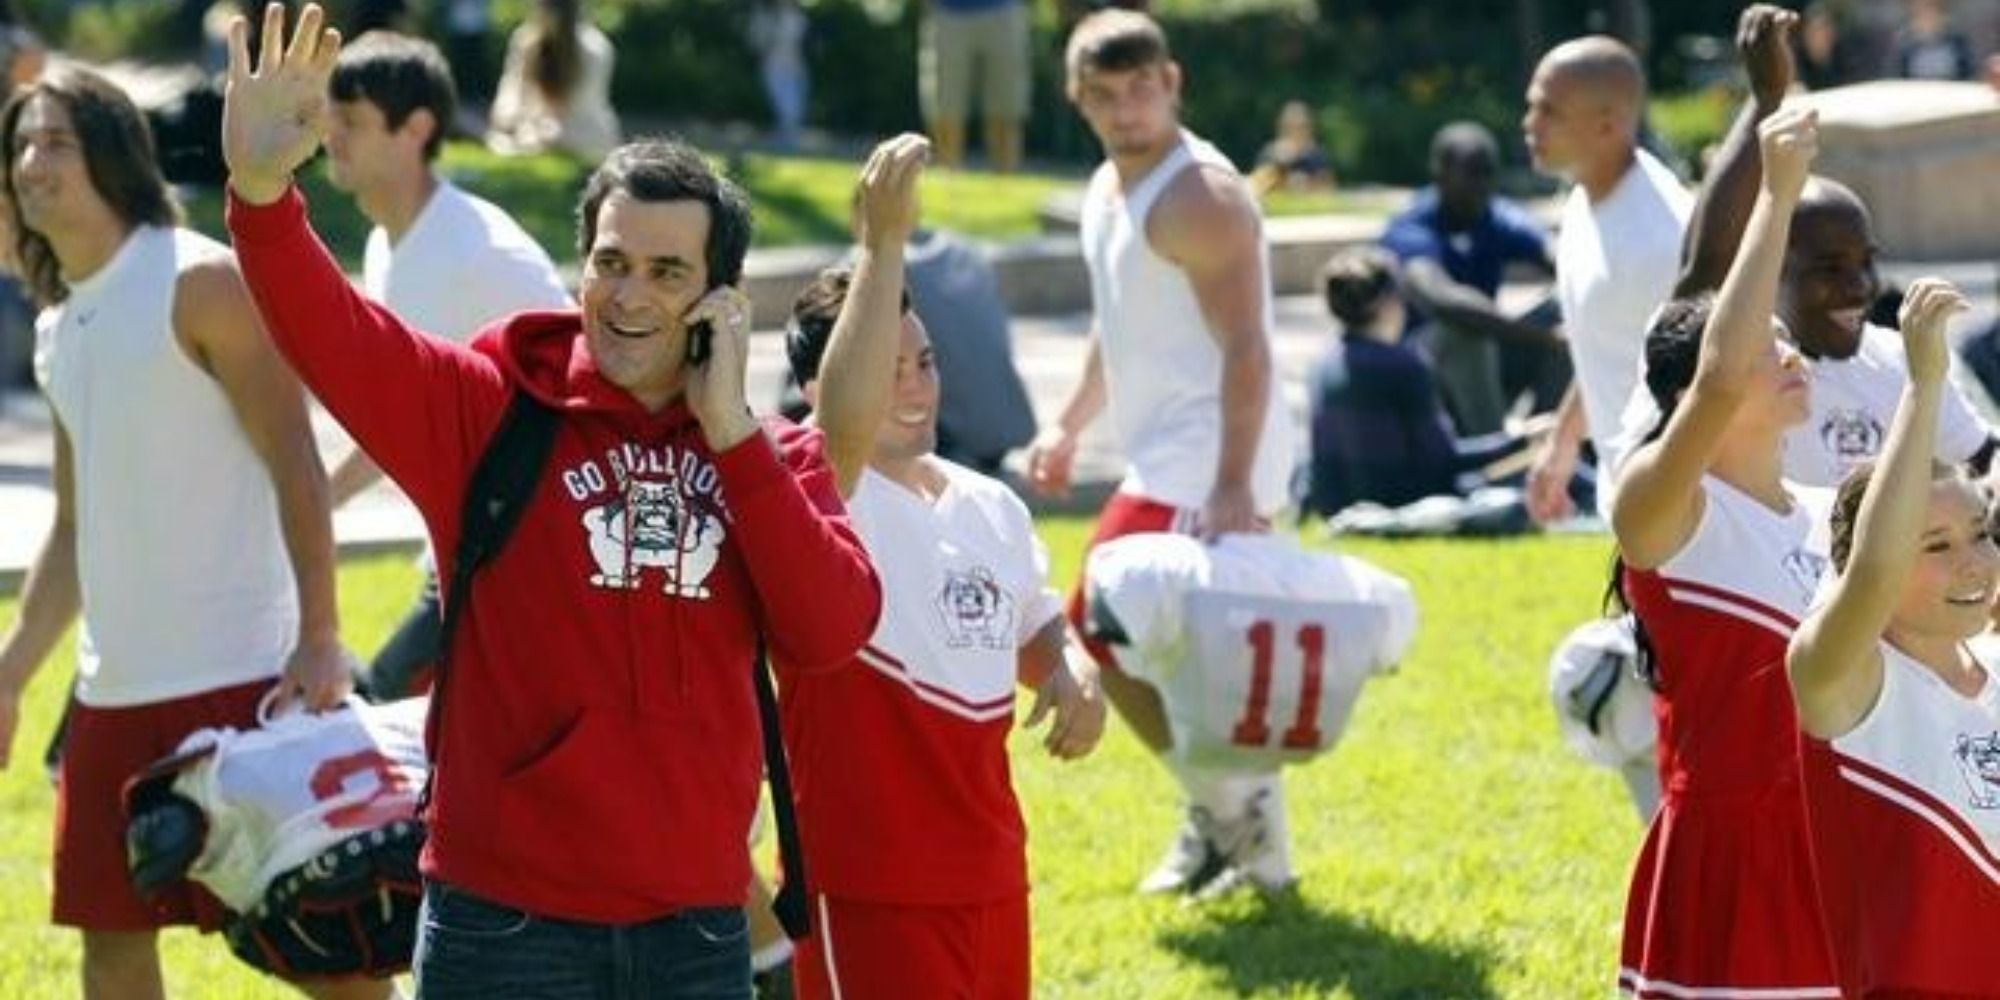 Modern Family 10 Best Phil Dunphy Greetings & Their Meanings